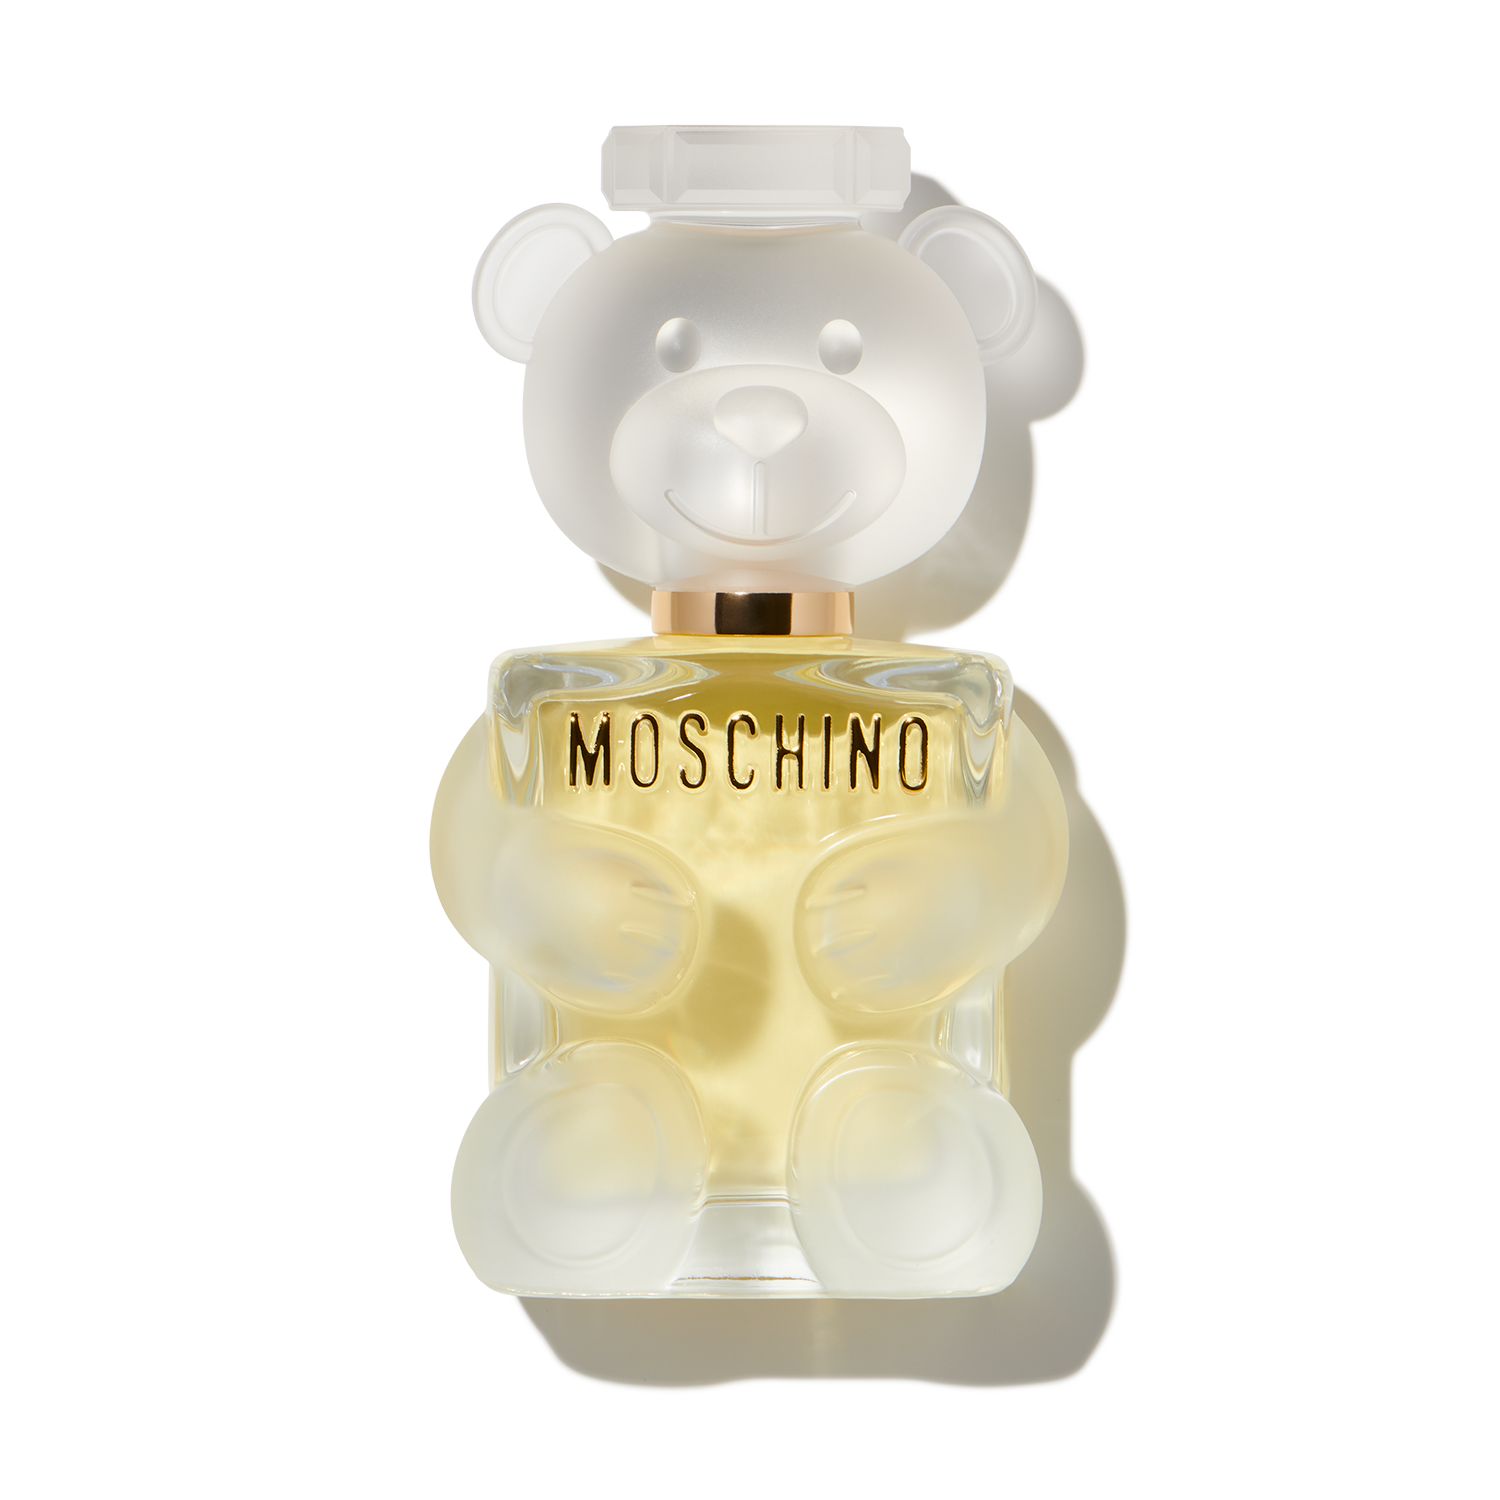 Score MOSCHINO Toy 2 perfume at Scentbird for $16.95